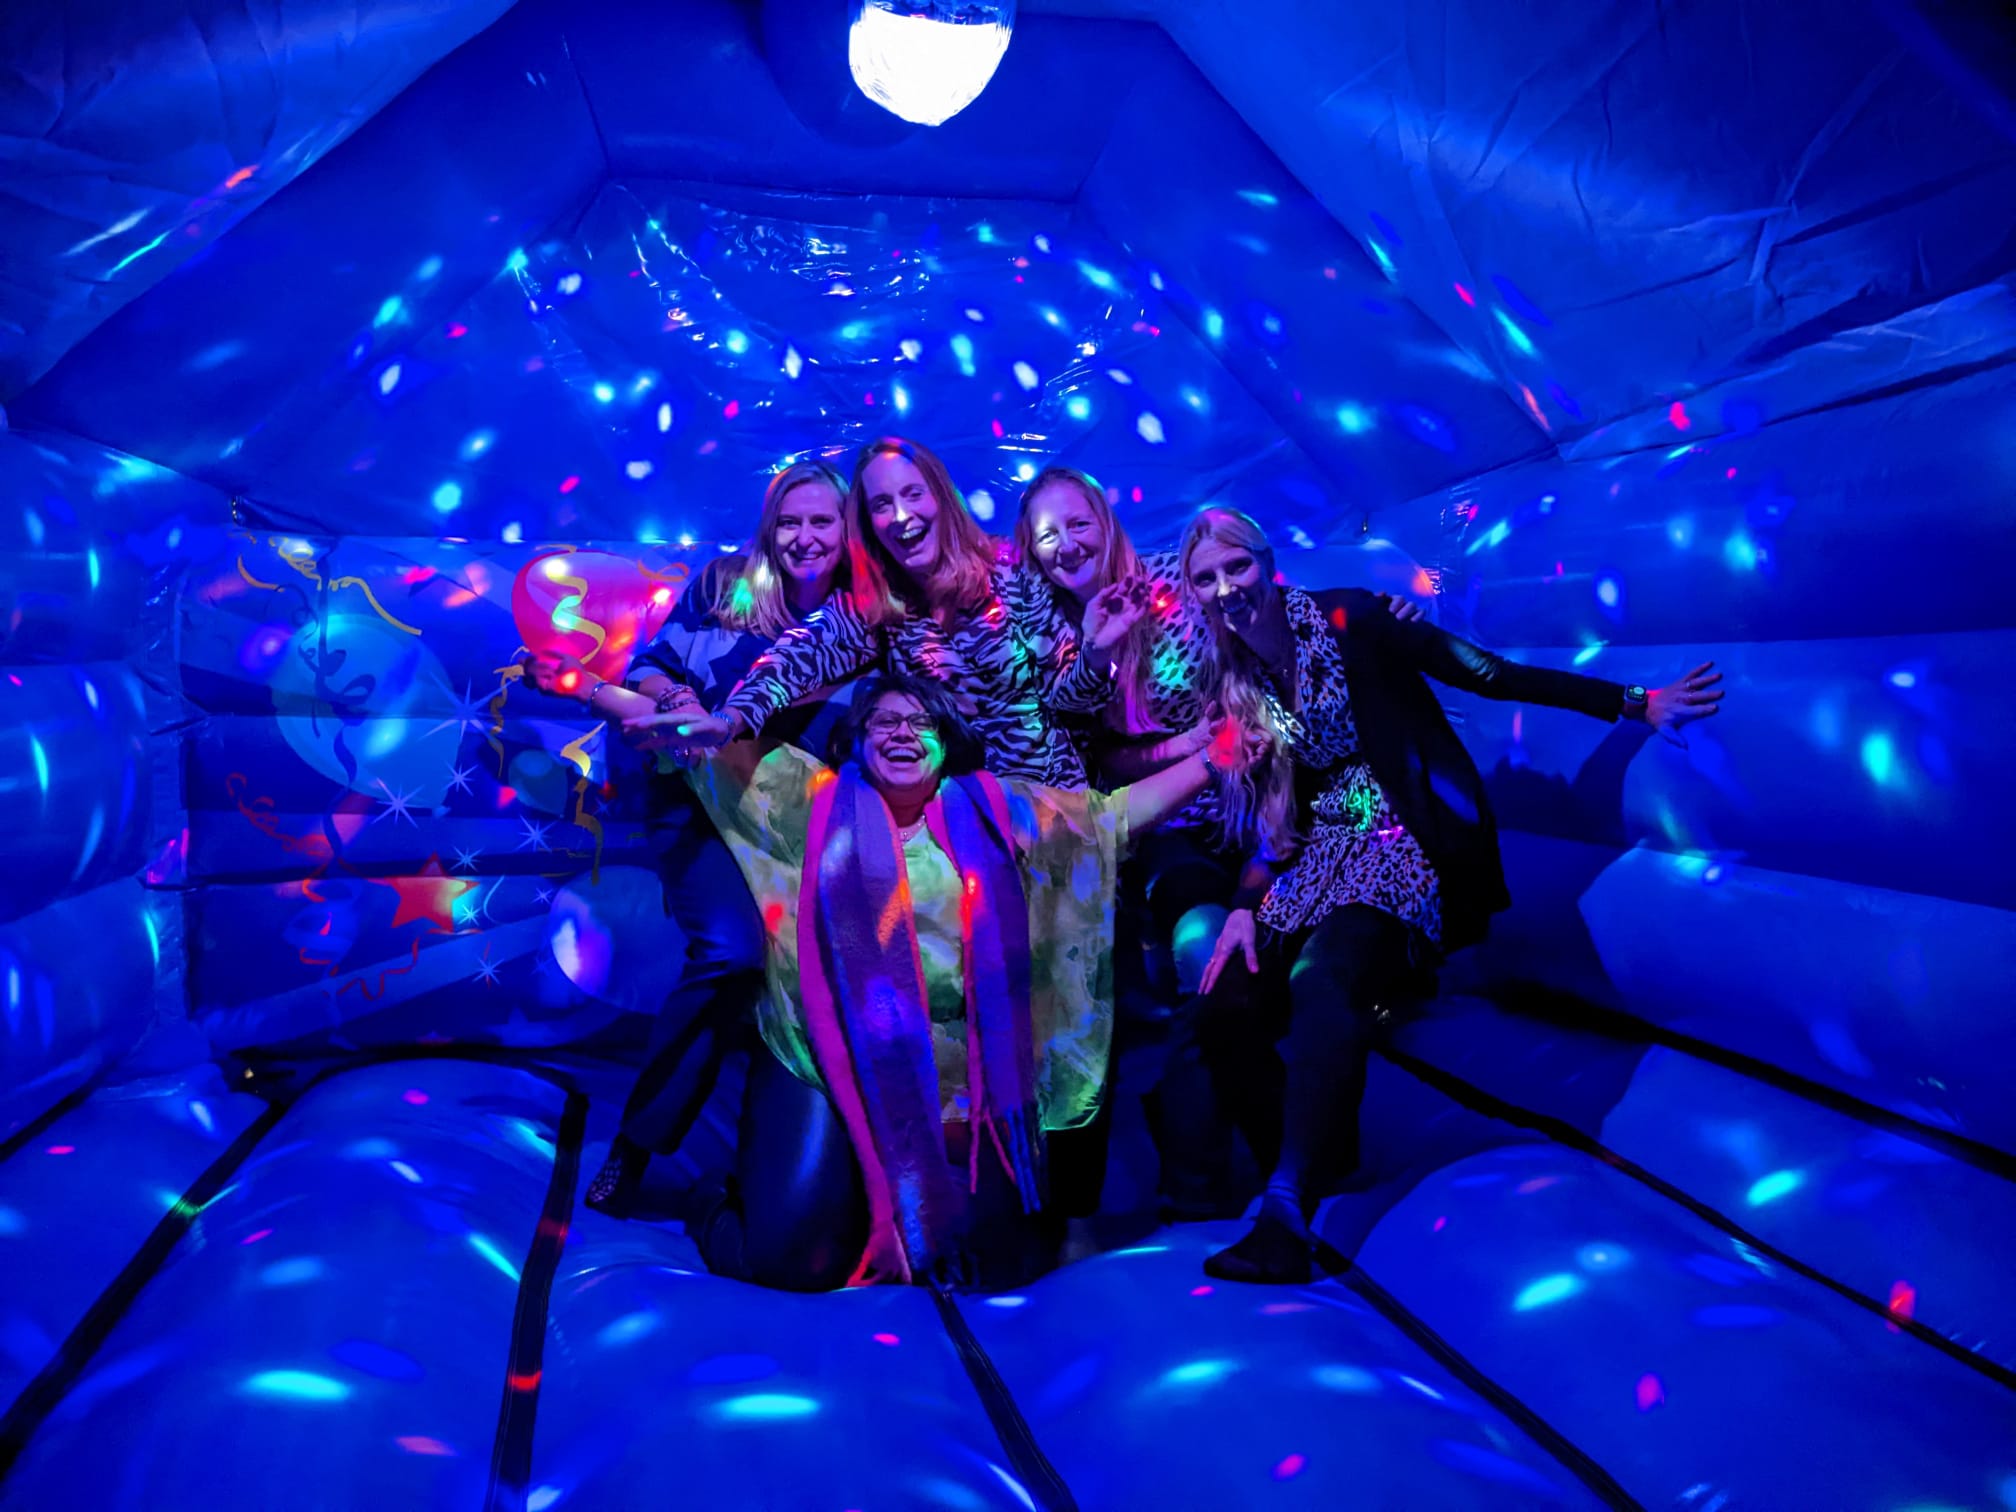 Hire this A Frame Bouncy Castle Disco